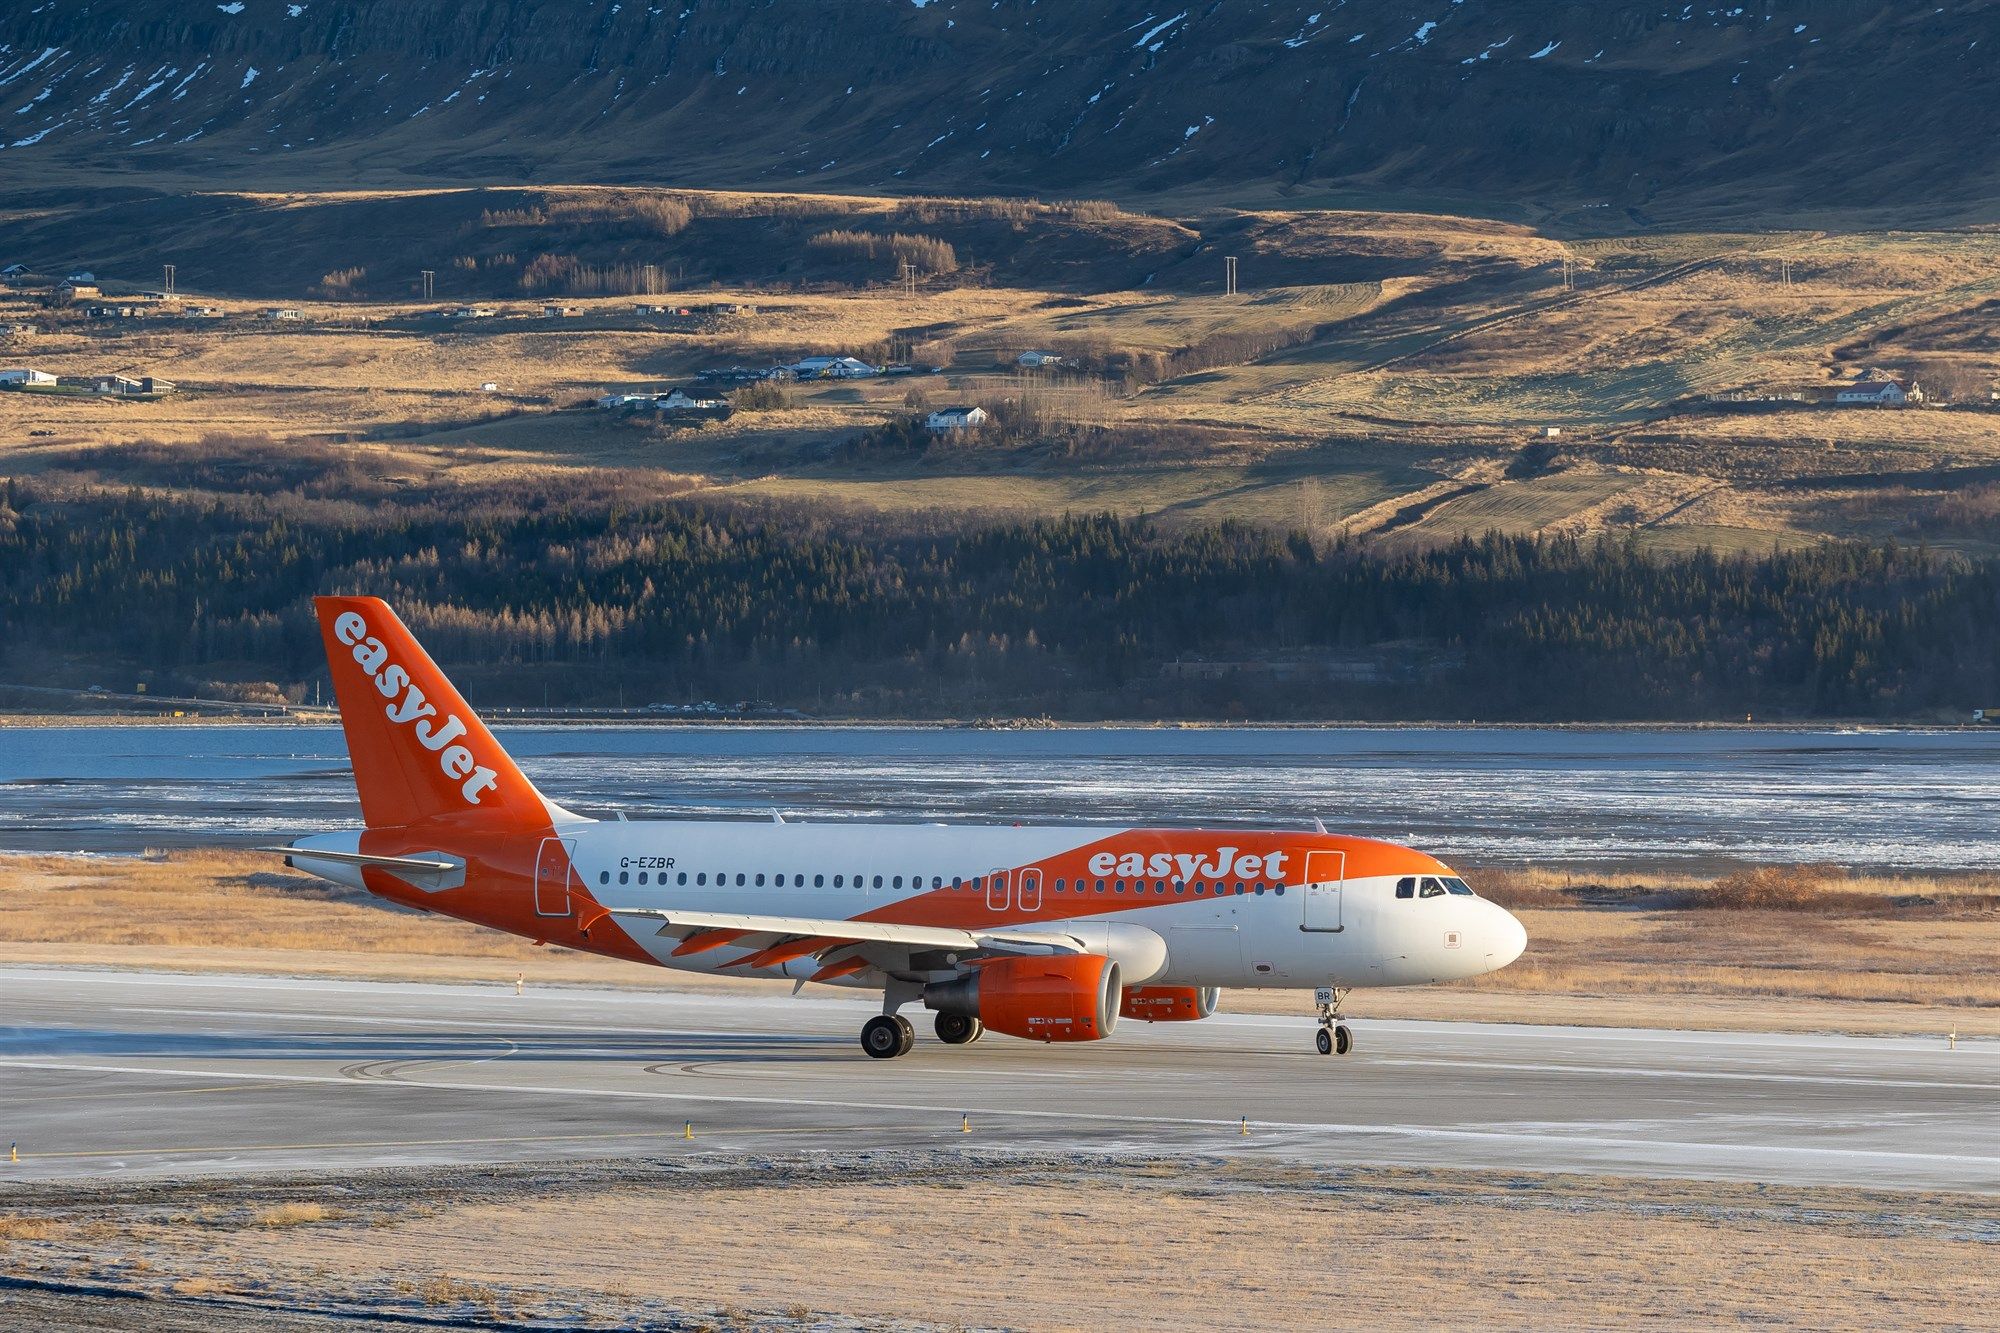 An easyjet Airbus A319 lands at Akureyri Airport in North Iceland